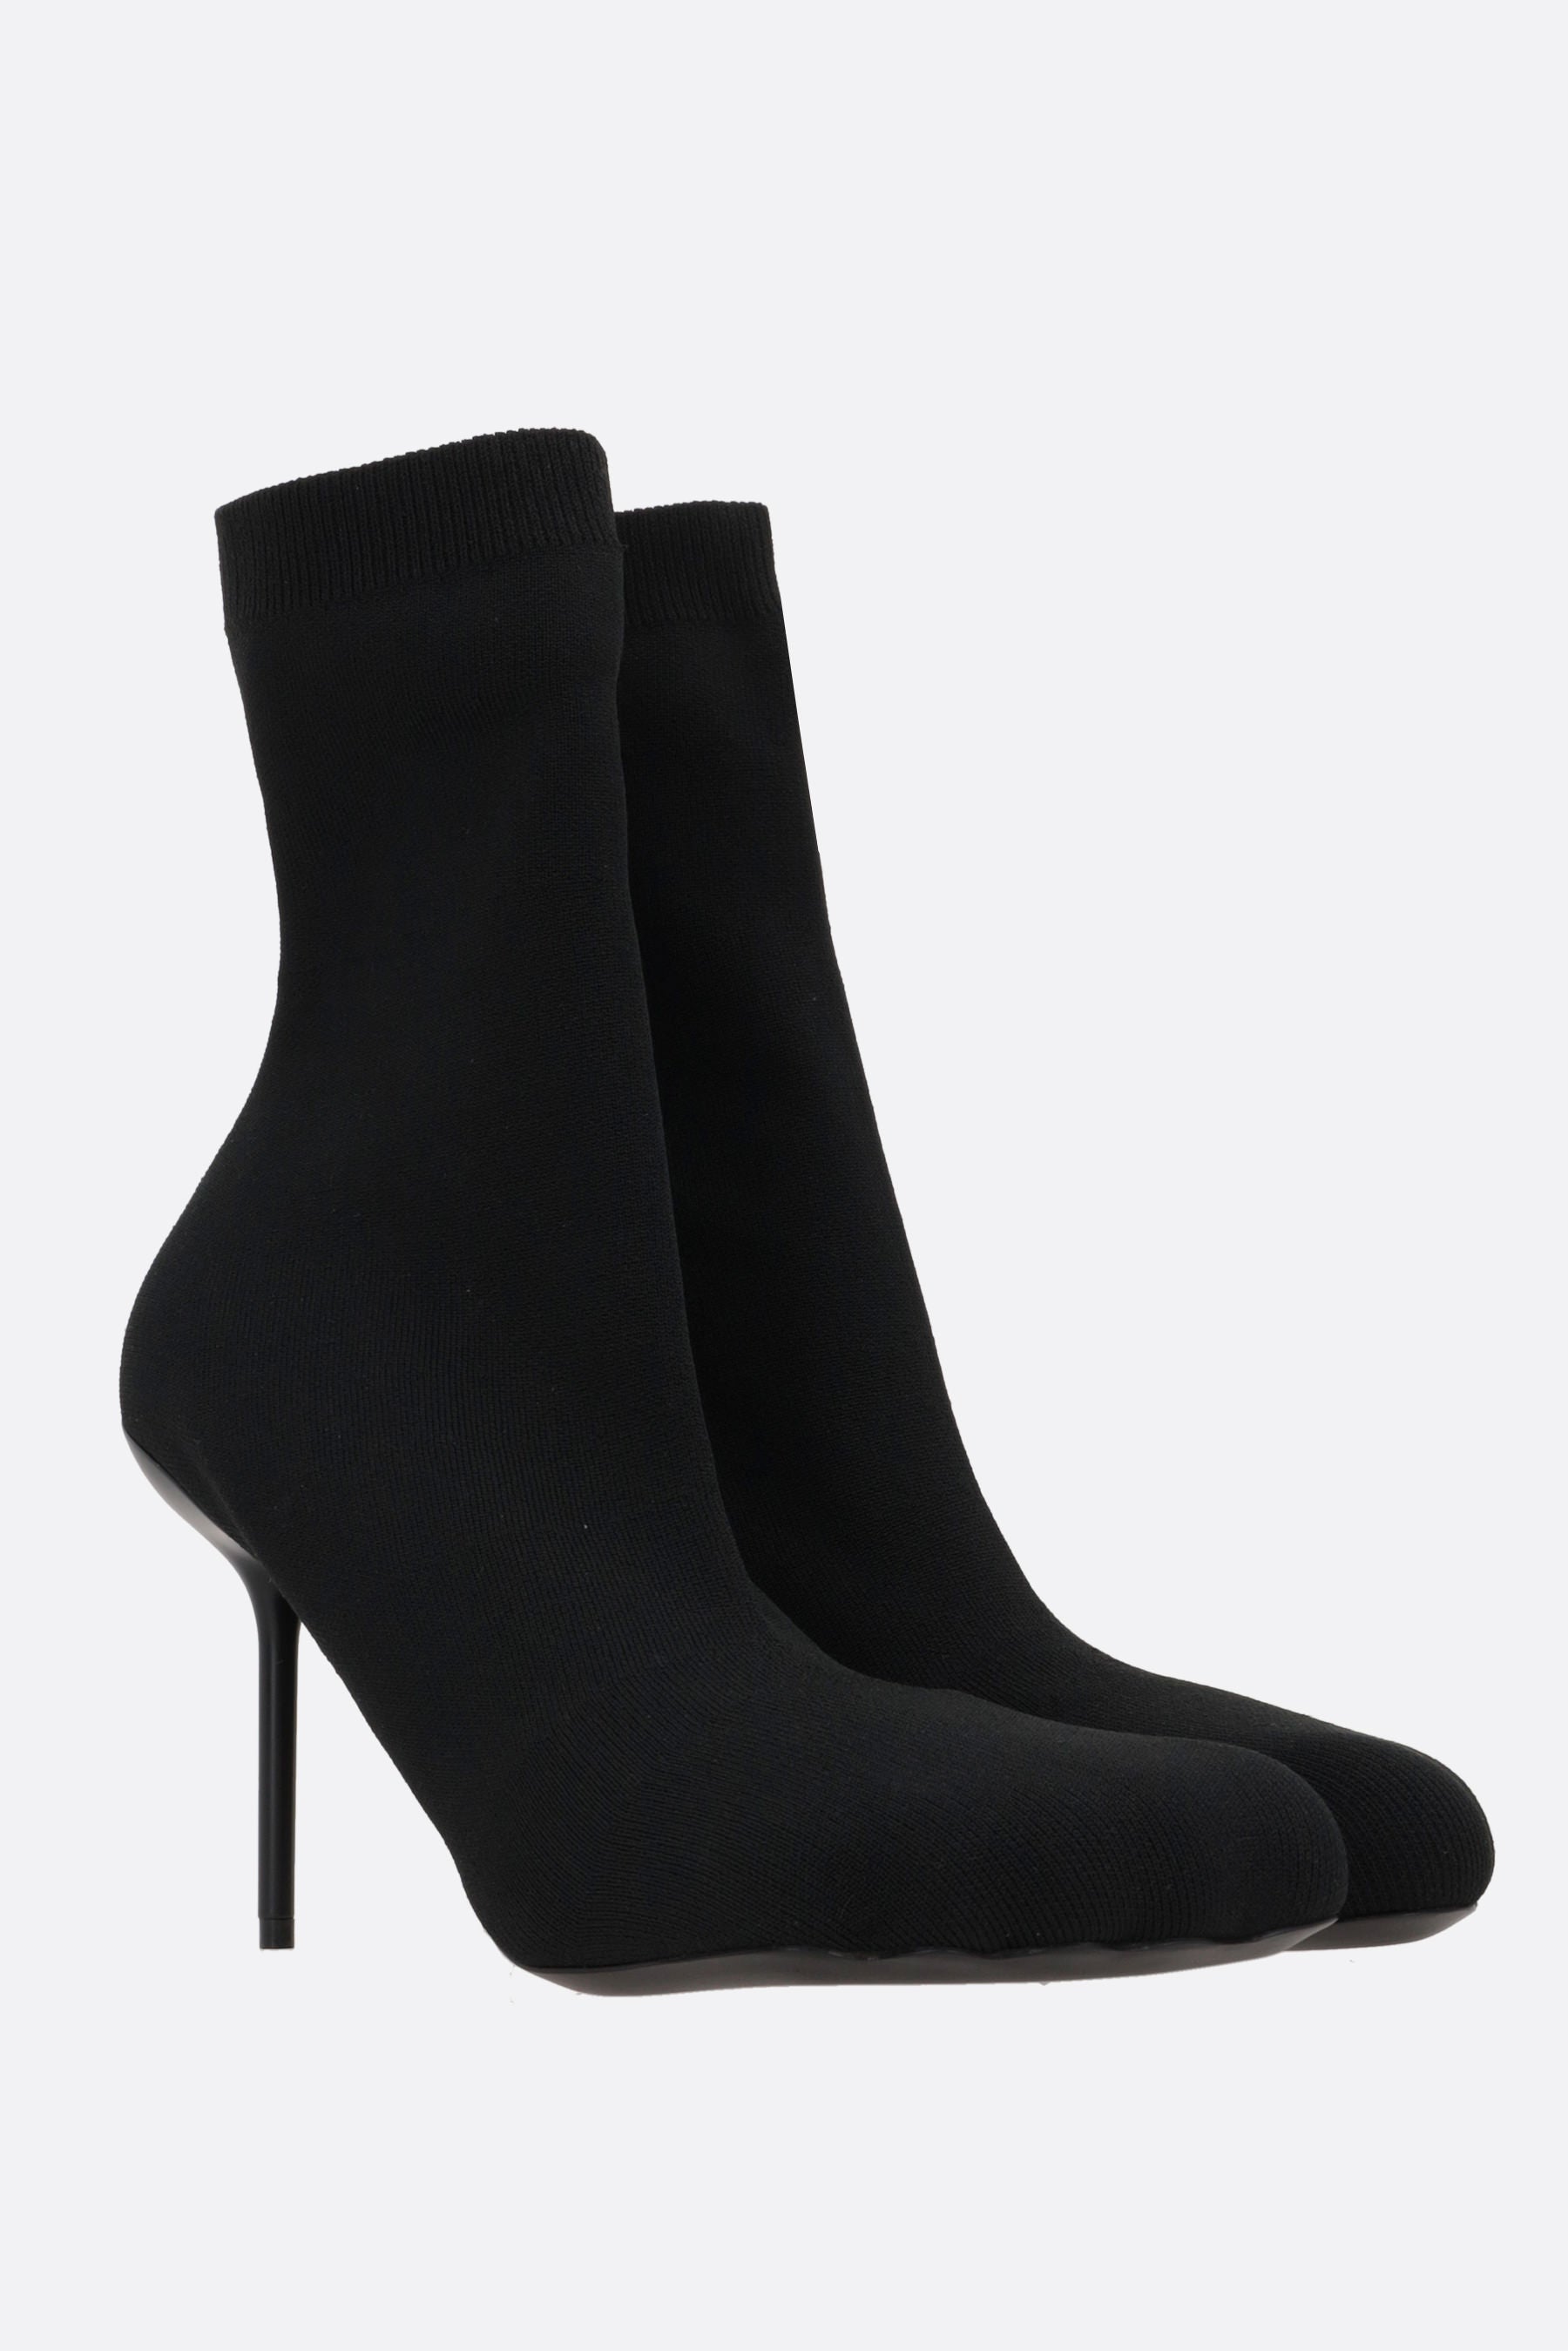 Anatomic stretch knit ankle boots – 10corsocomo